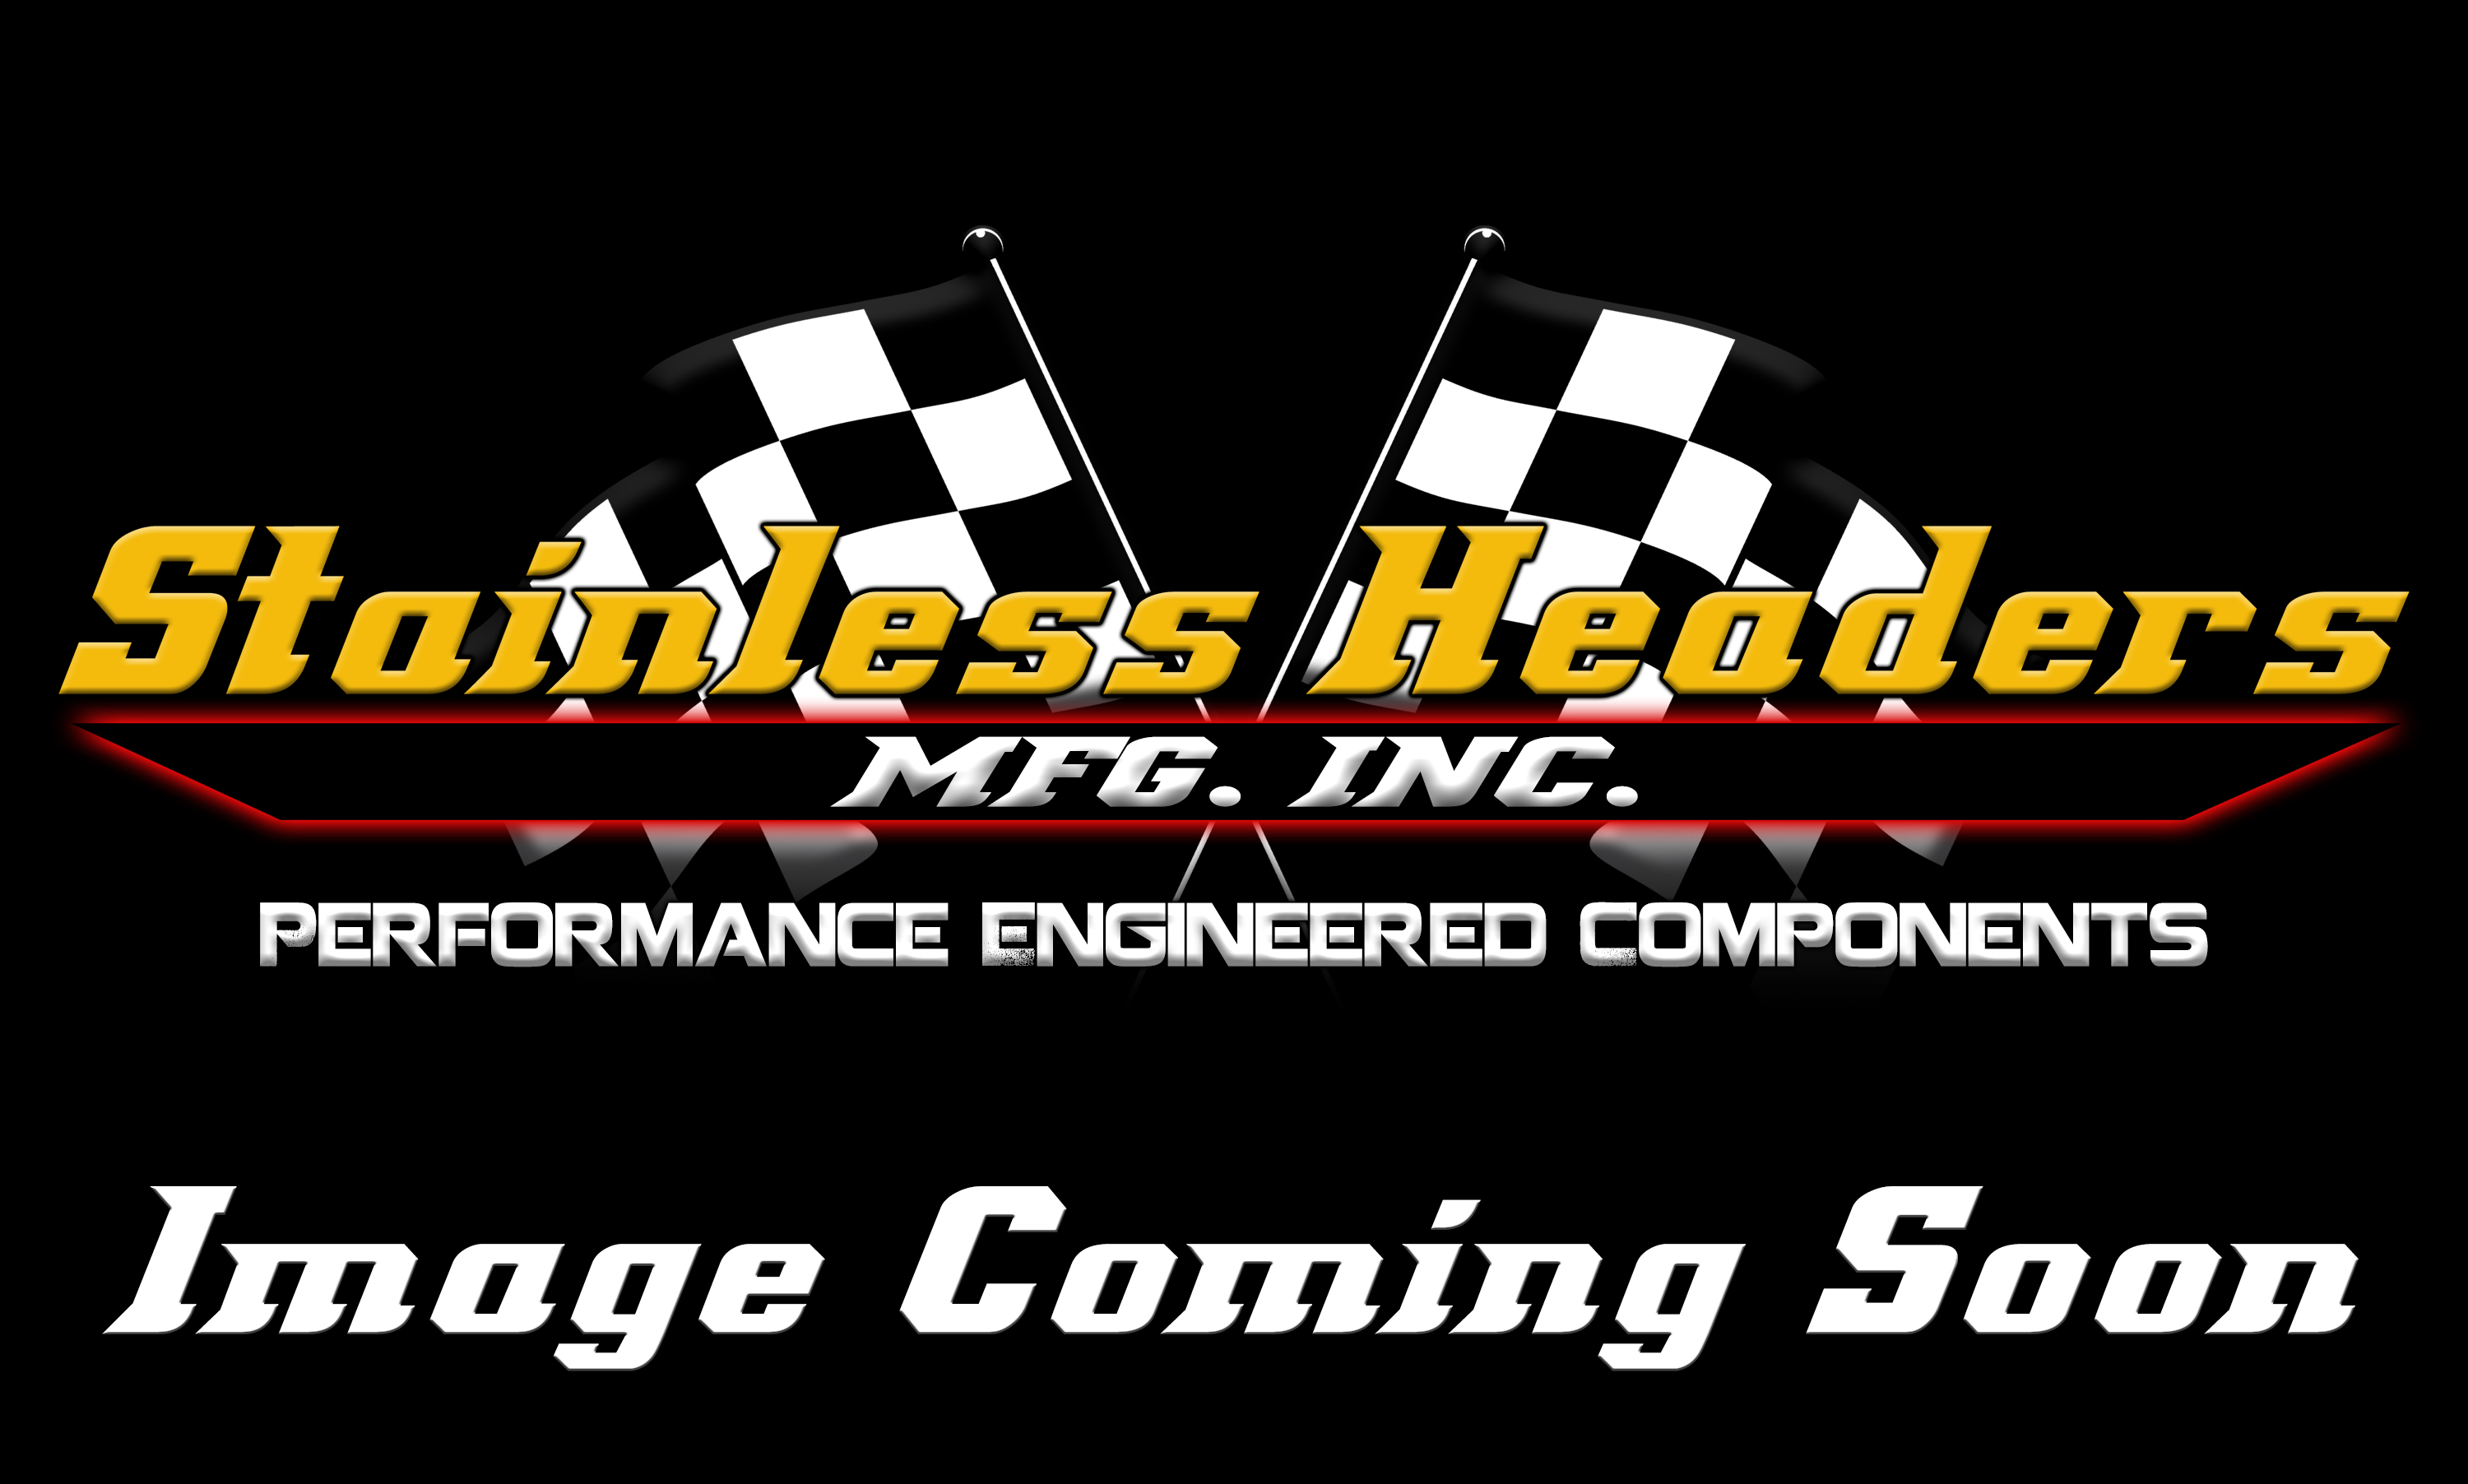 Stainless Headers - 1 3/4" Primary 8 into 1 Performance Merge Collector-16ga 304ss